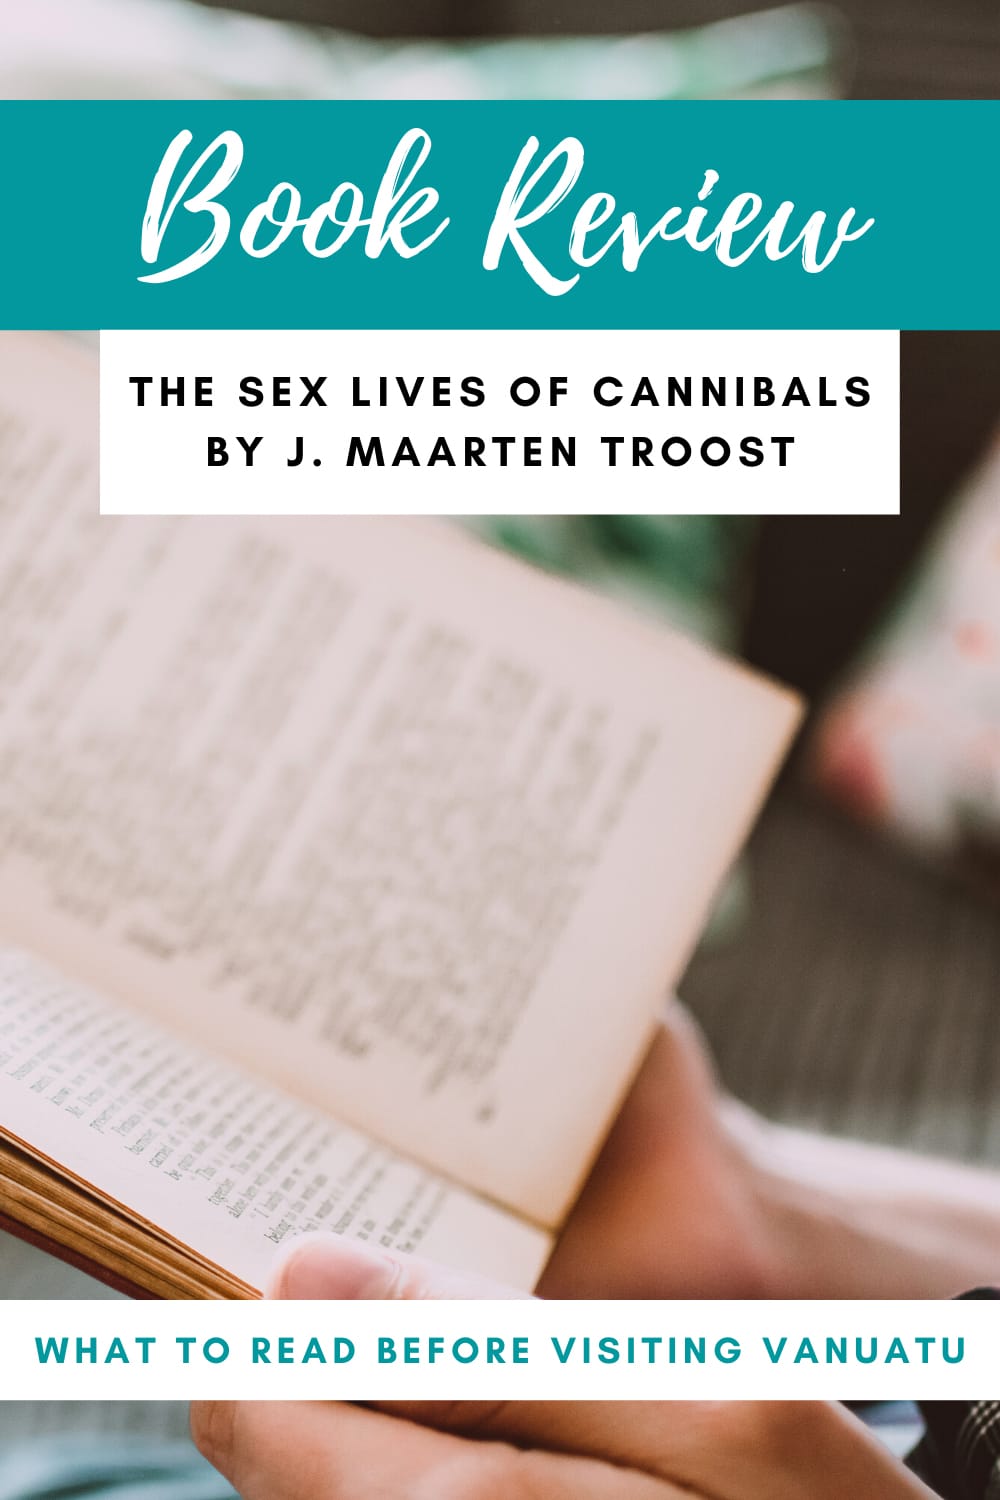 Book Review: The Sex Lives of Cannibals by J. Maarten Troost | Full Time Explorer | Travel Books | Travel Memoirs | Books About Traveling | Vacation Reads | Island Travel | Books About Vanuatu | Beach Reads | Travel Genre | Airplane Entertainment #travel #book #memoir #travelmemoir #entertainment #Vanuatu